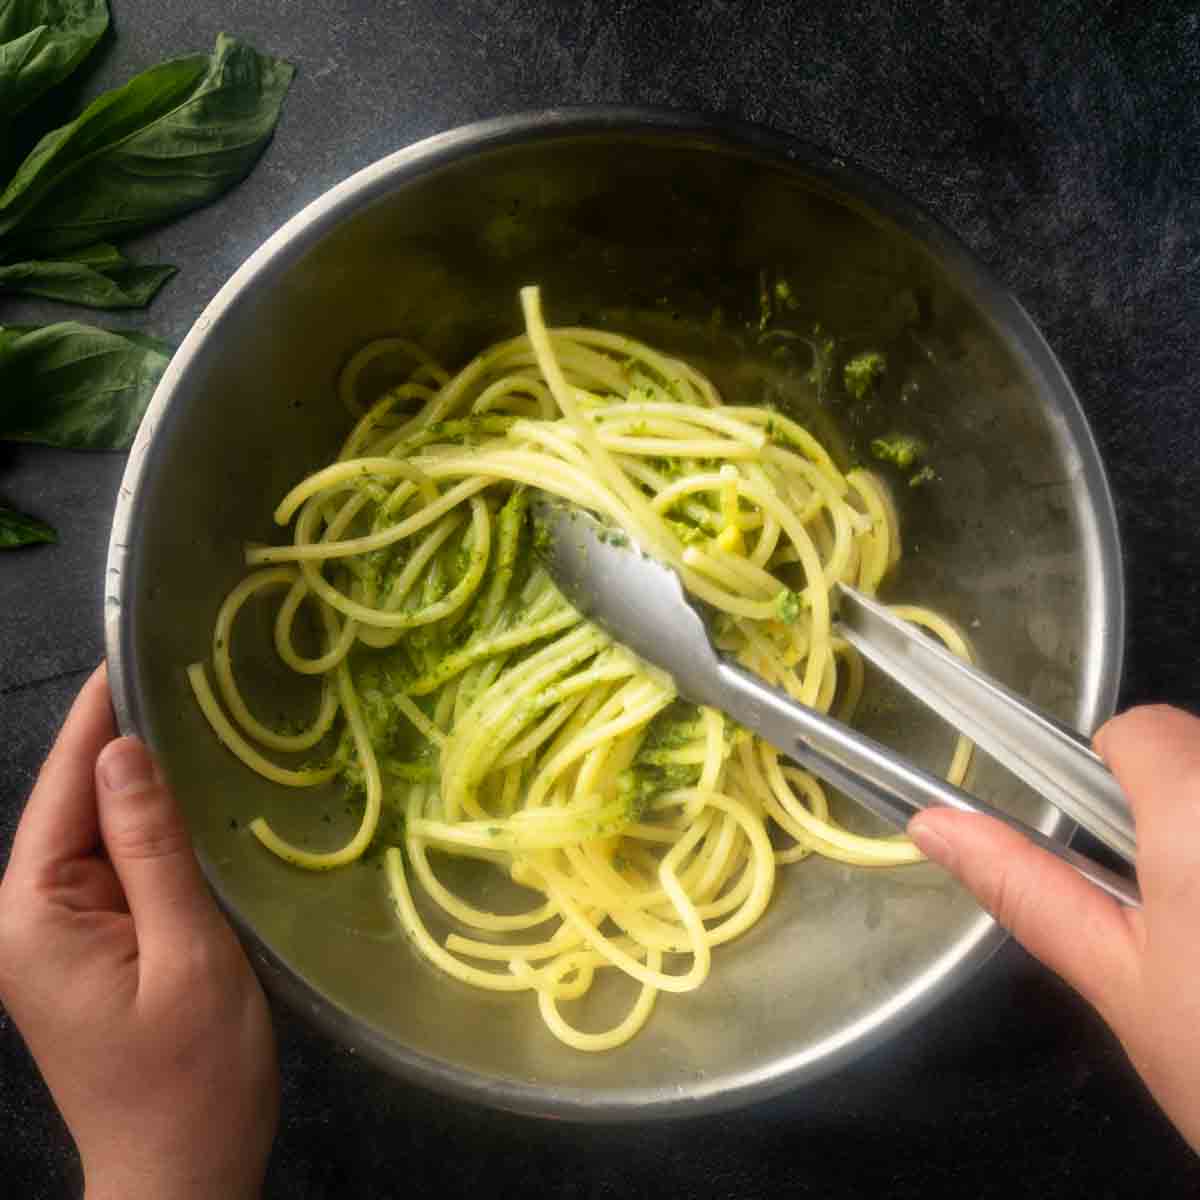 Tossing the spaghetti in pesto sauce with tongs.